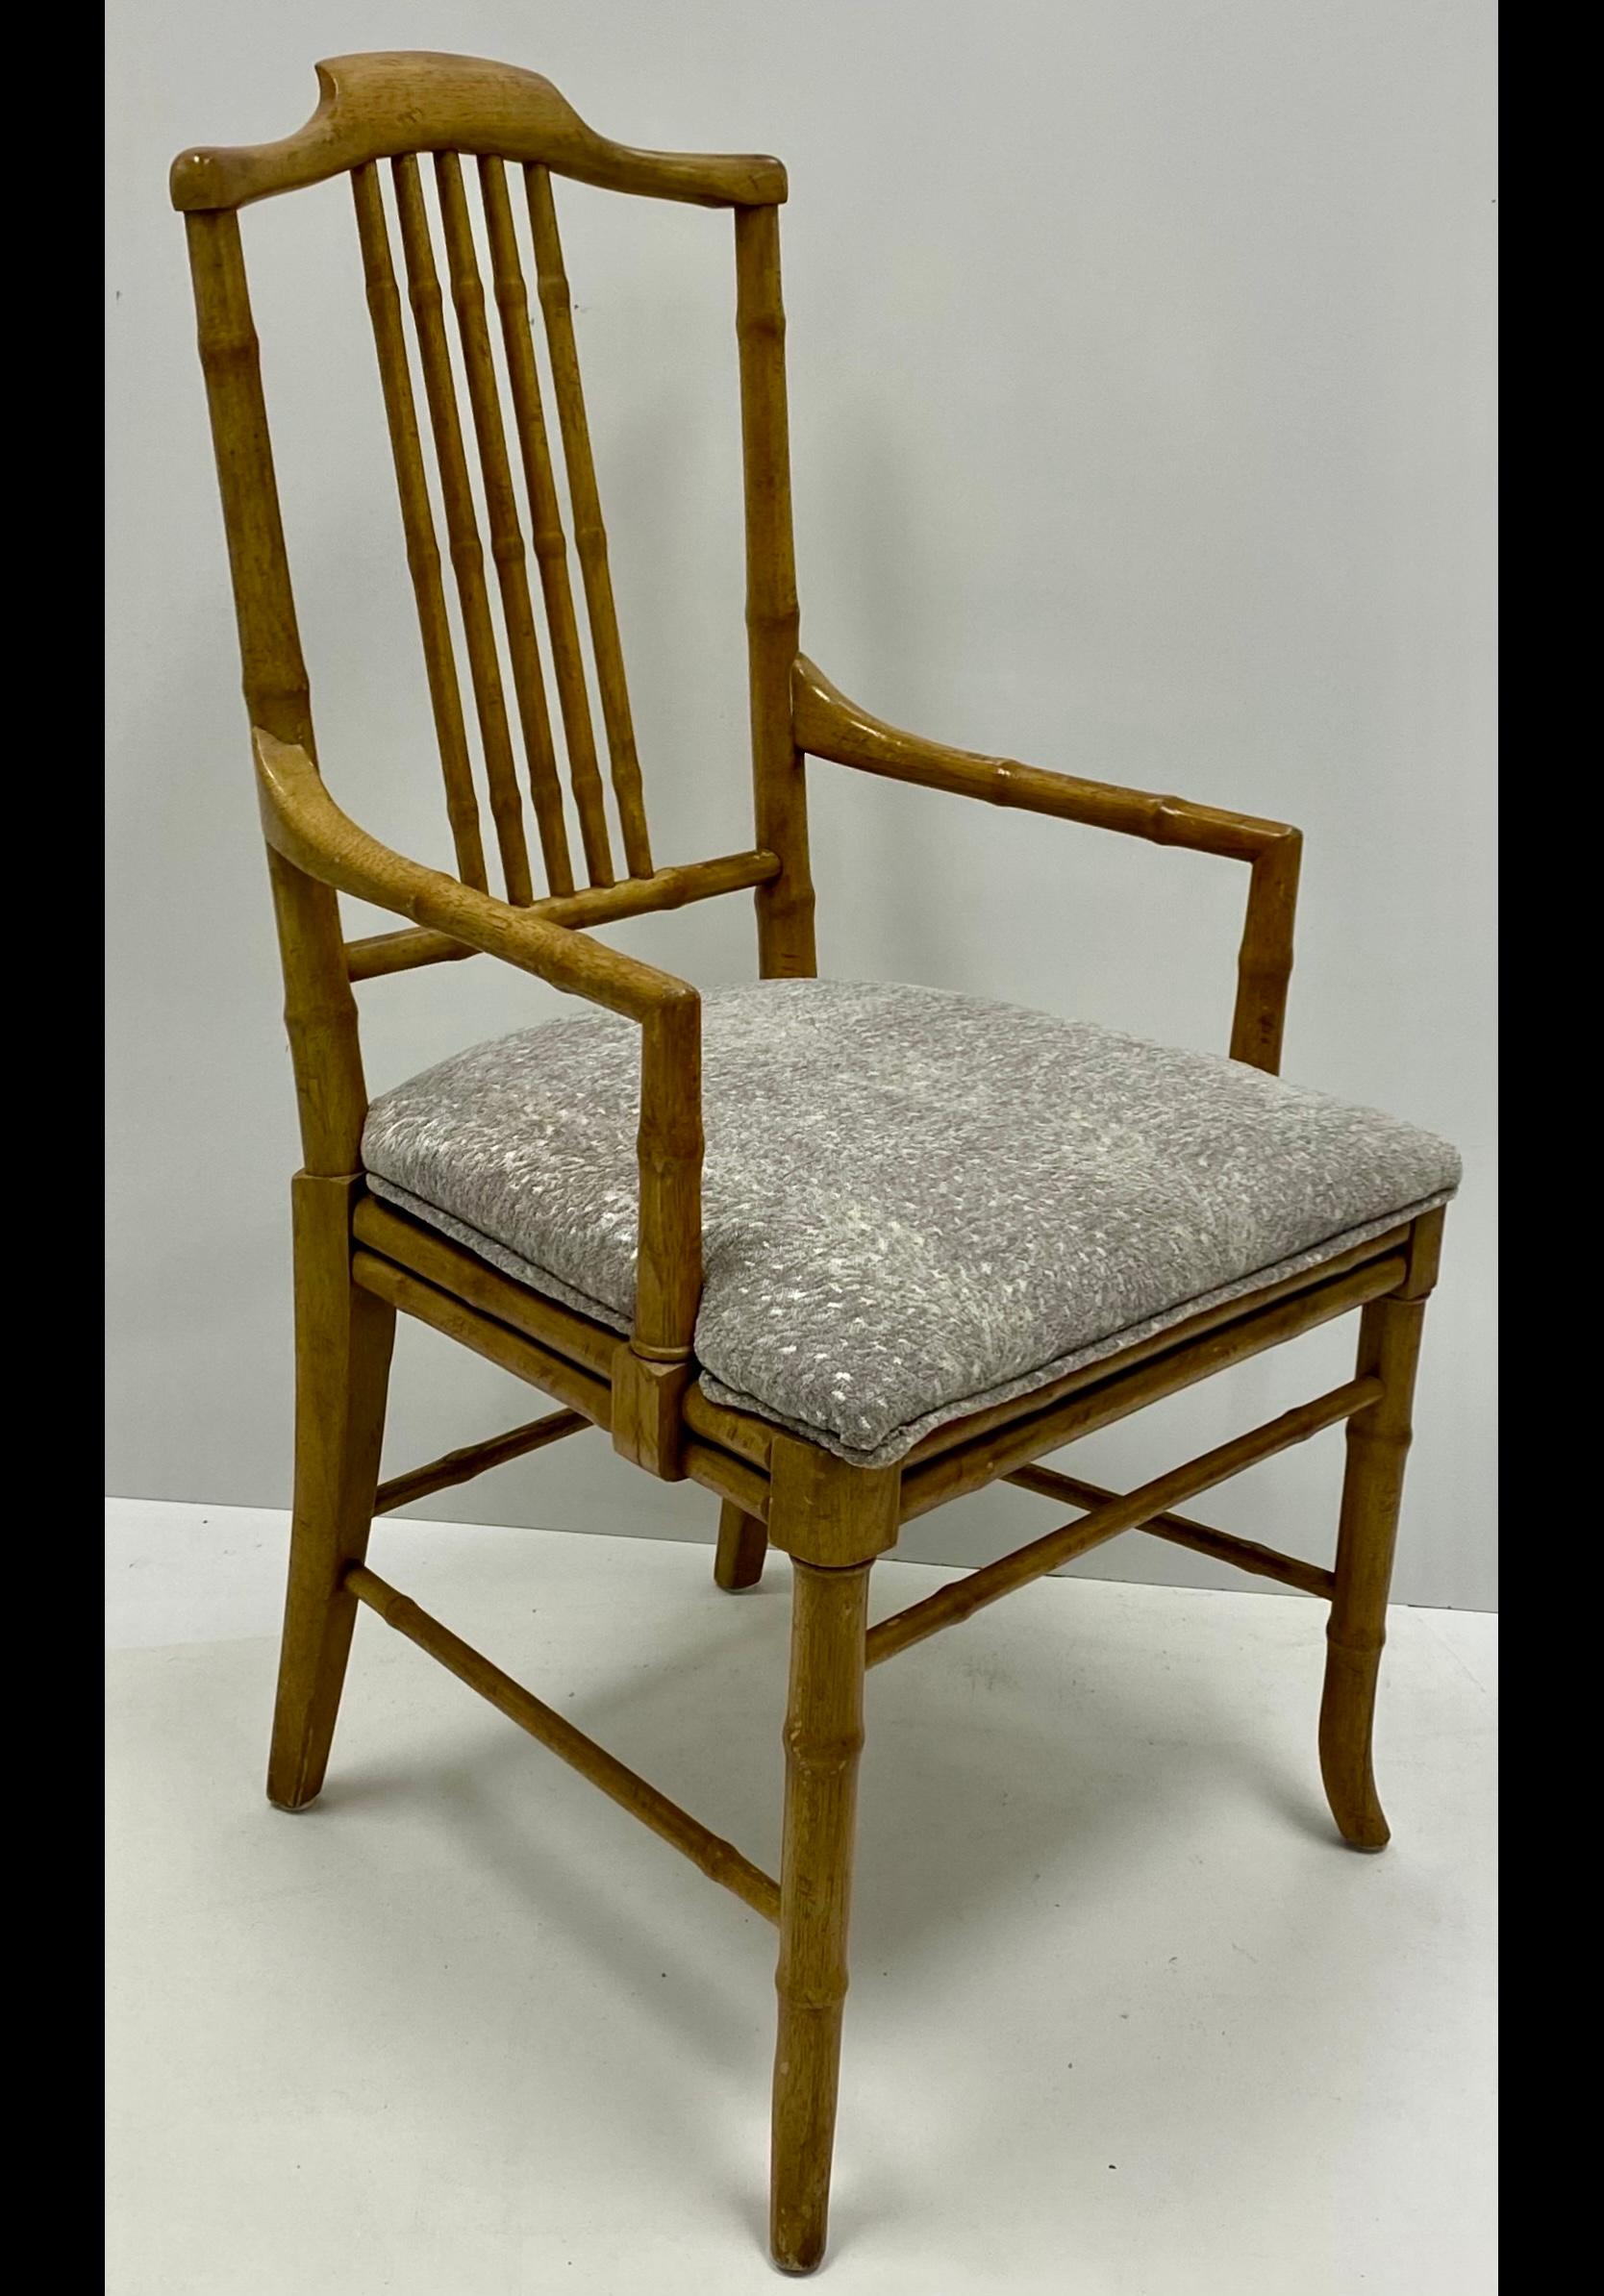 1970s Regency Style Faux Bamboo Bergere Armchairs In Grey Fawn Upholstery -Pair For Sale 3